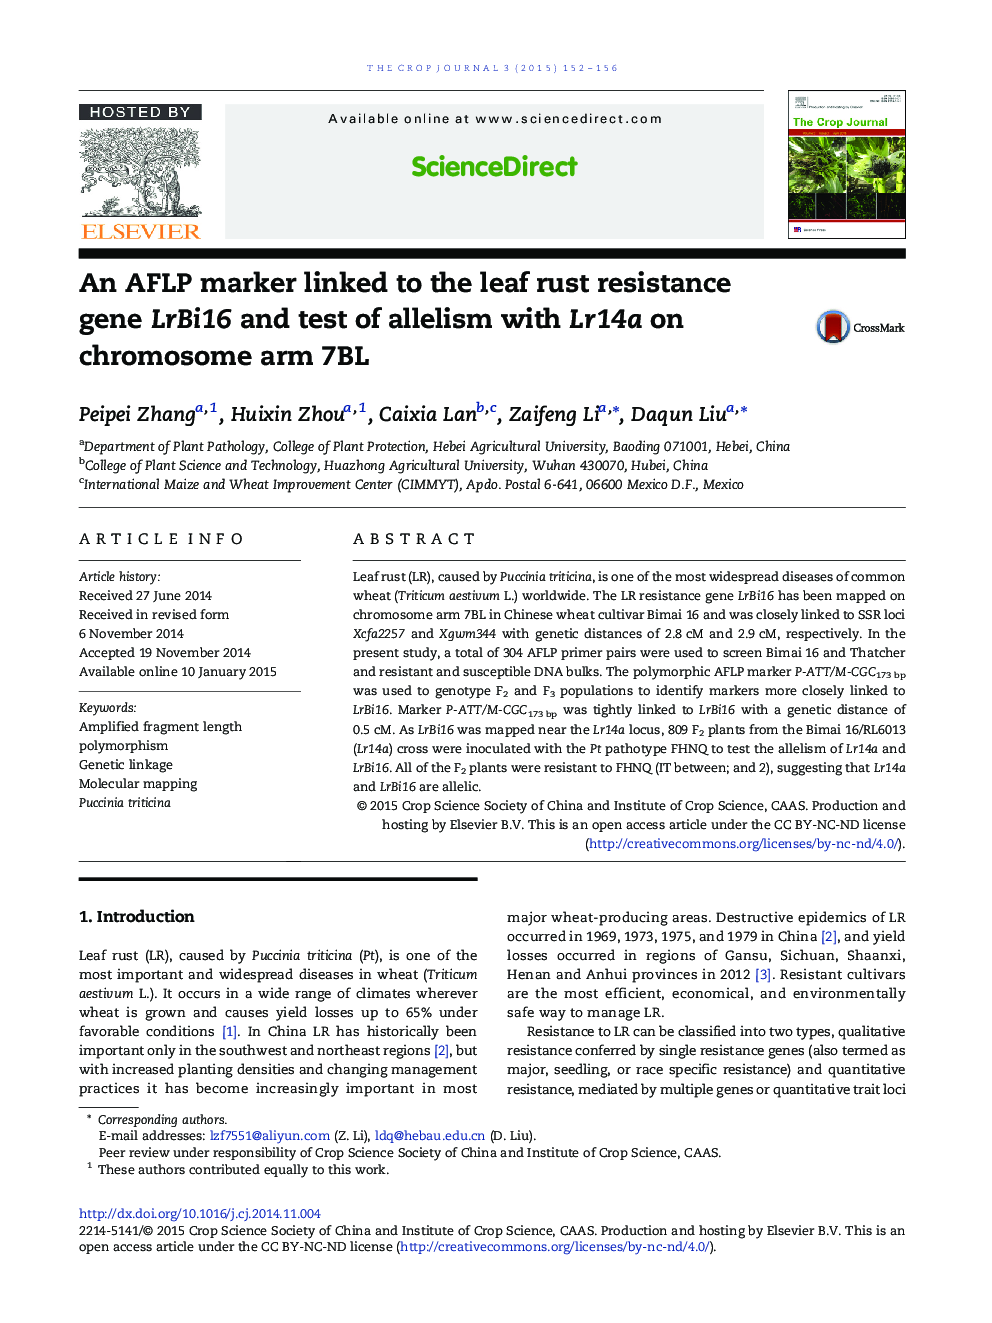 An AFLP marker linked to the leaf rust resistance gene LrBi16 and test of allelism with Lr14a on chromosome arm 7BL